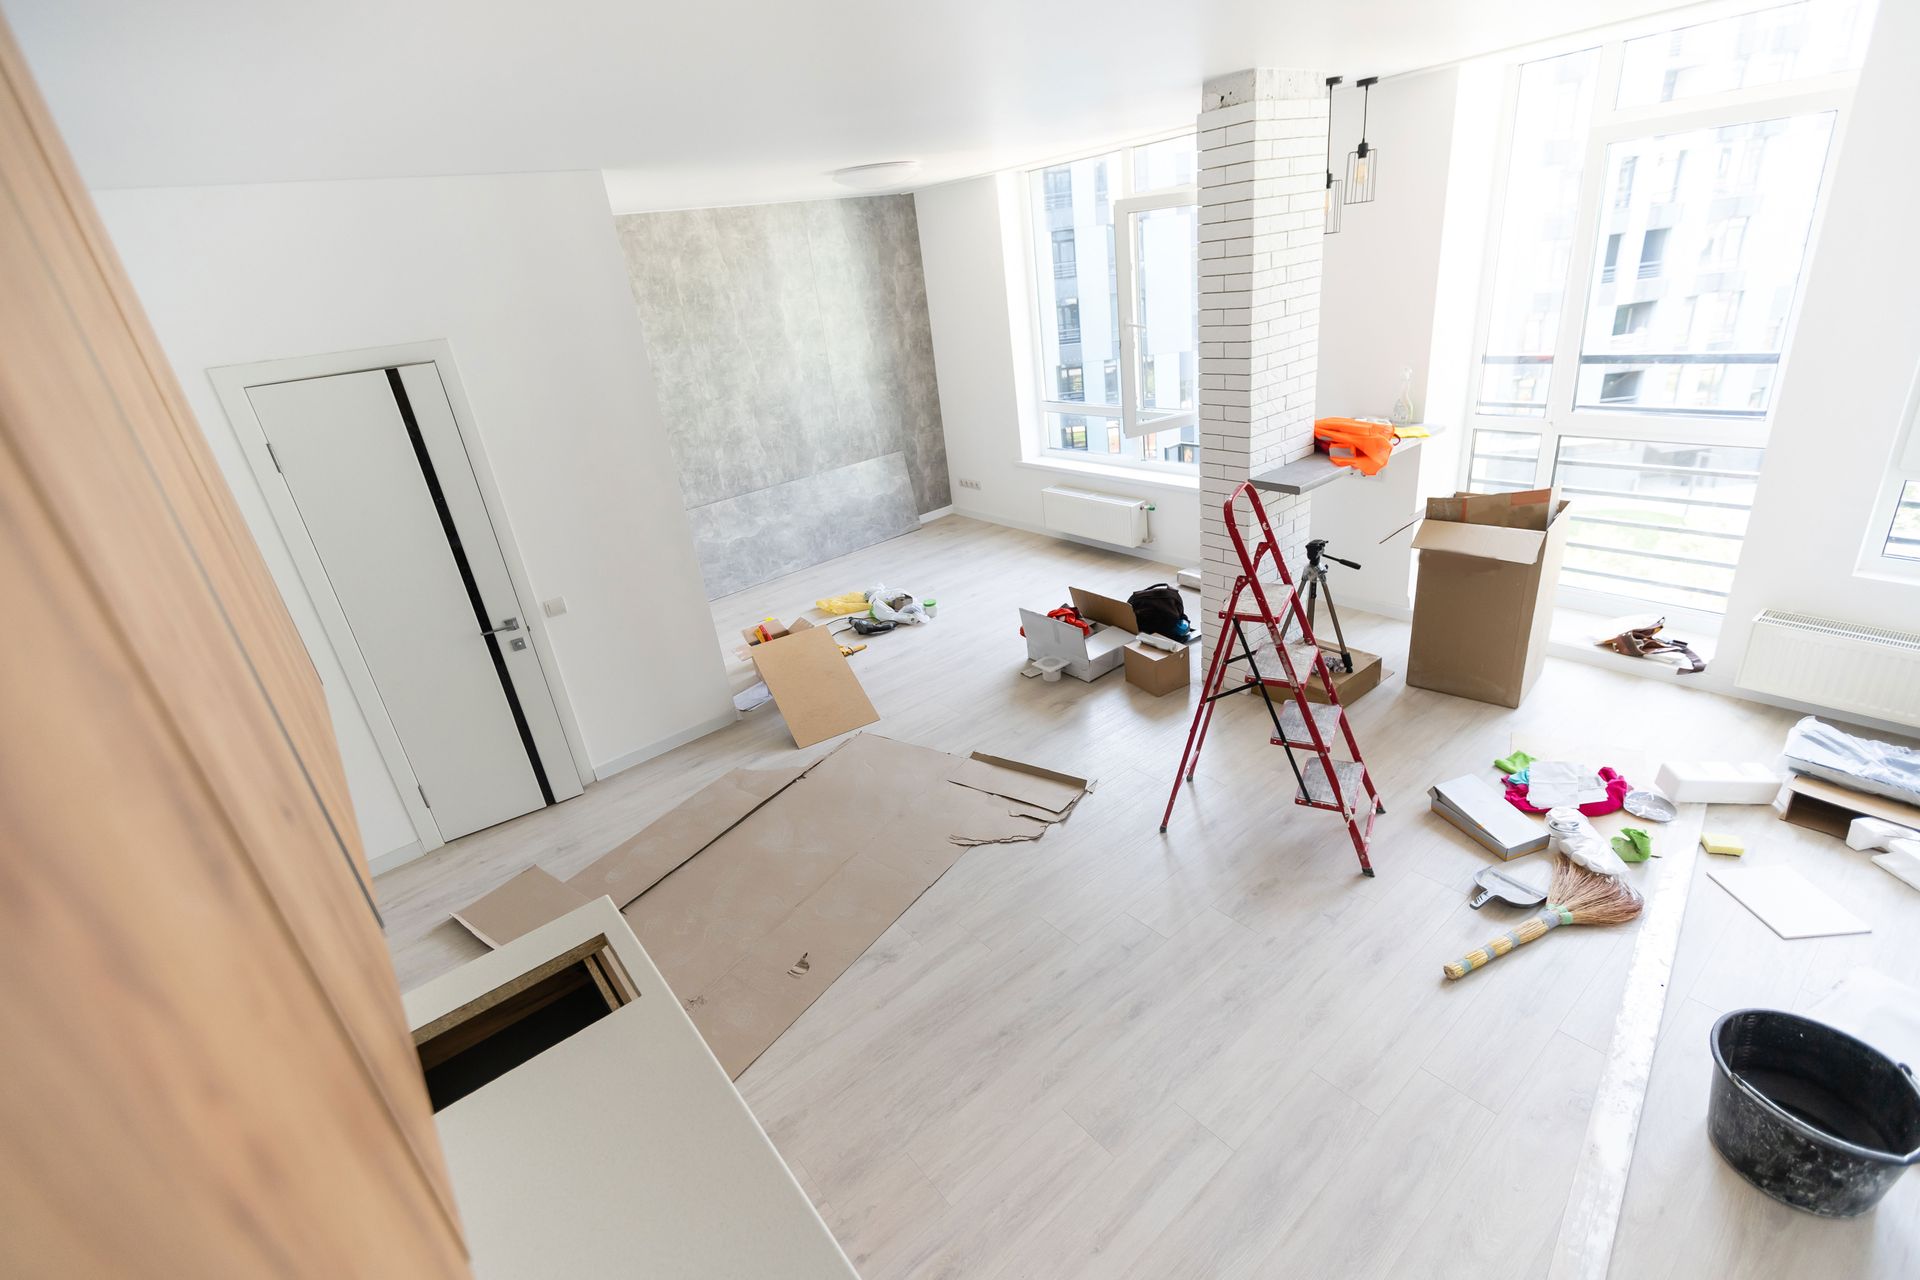 Remodeling Services in Cary, NC